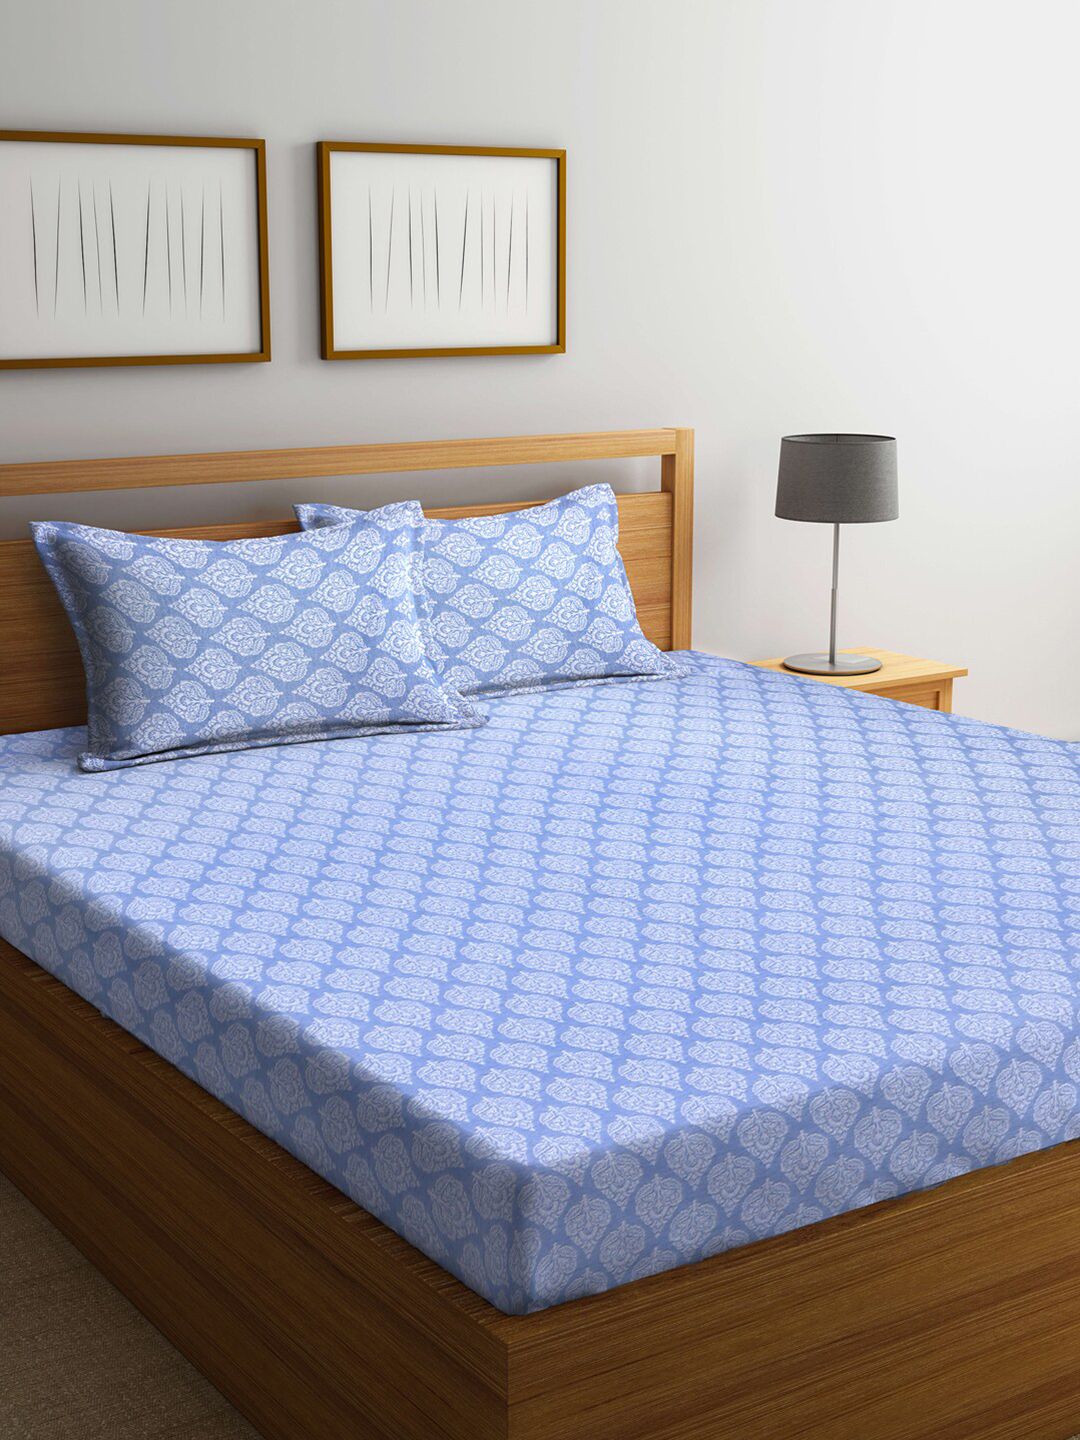 Arrabi Blue & White Ethnic Motifs 300 TC Cotton Super King Bedsheet With 2 Pillow Covers Price in India